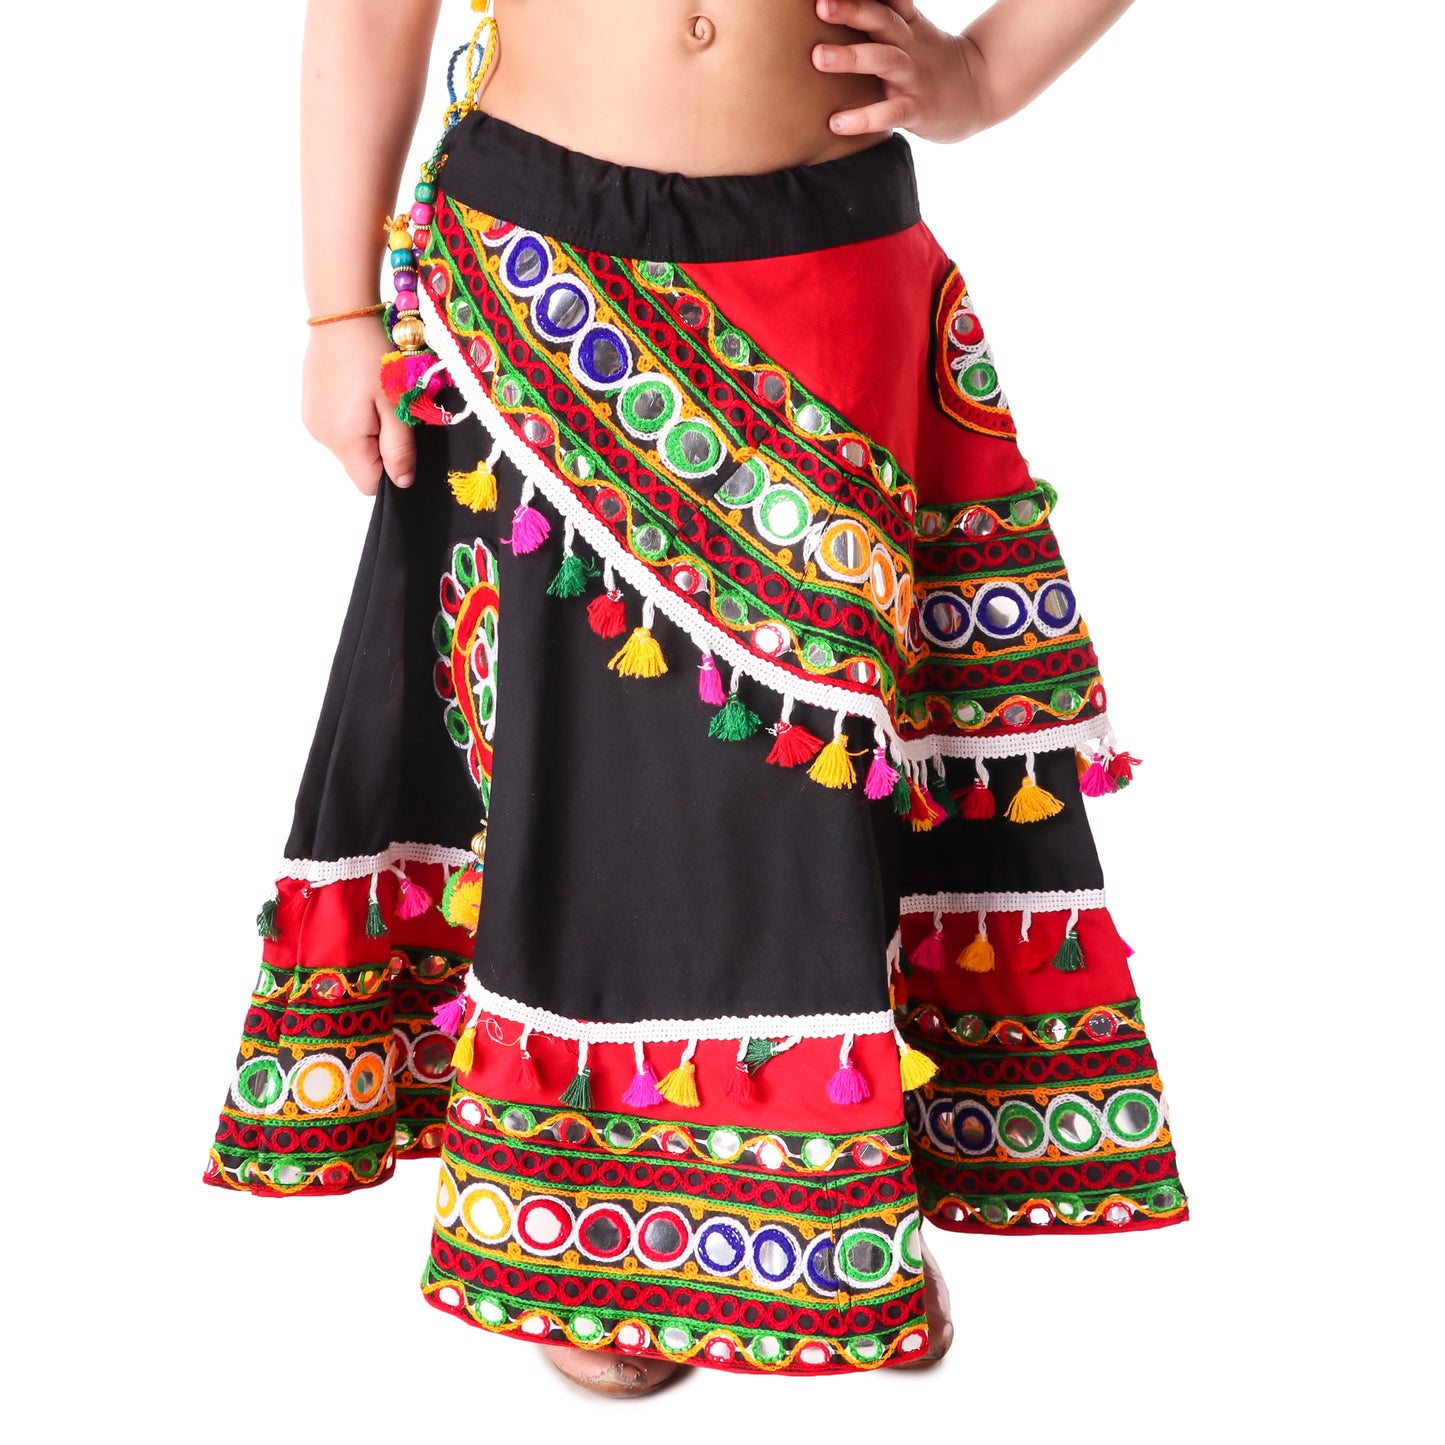 Multicolor Black and Red Lehenga Choli for Girls - Ages 0-16Y - Kutch Work